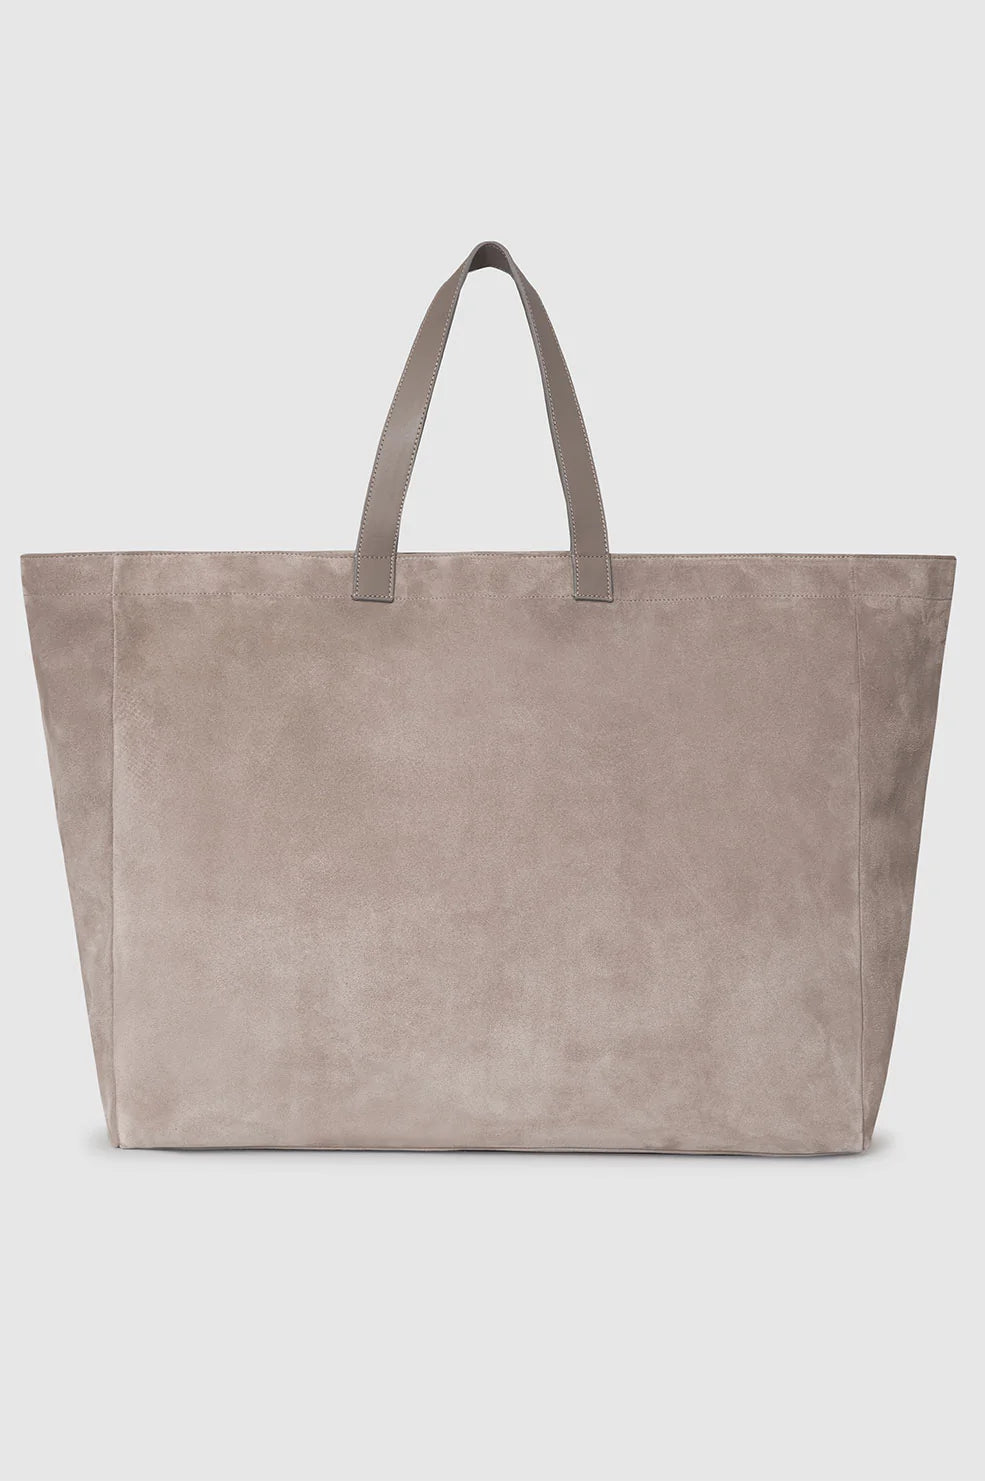 Rio Tote XL in Taupe Suede by ANINE BING